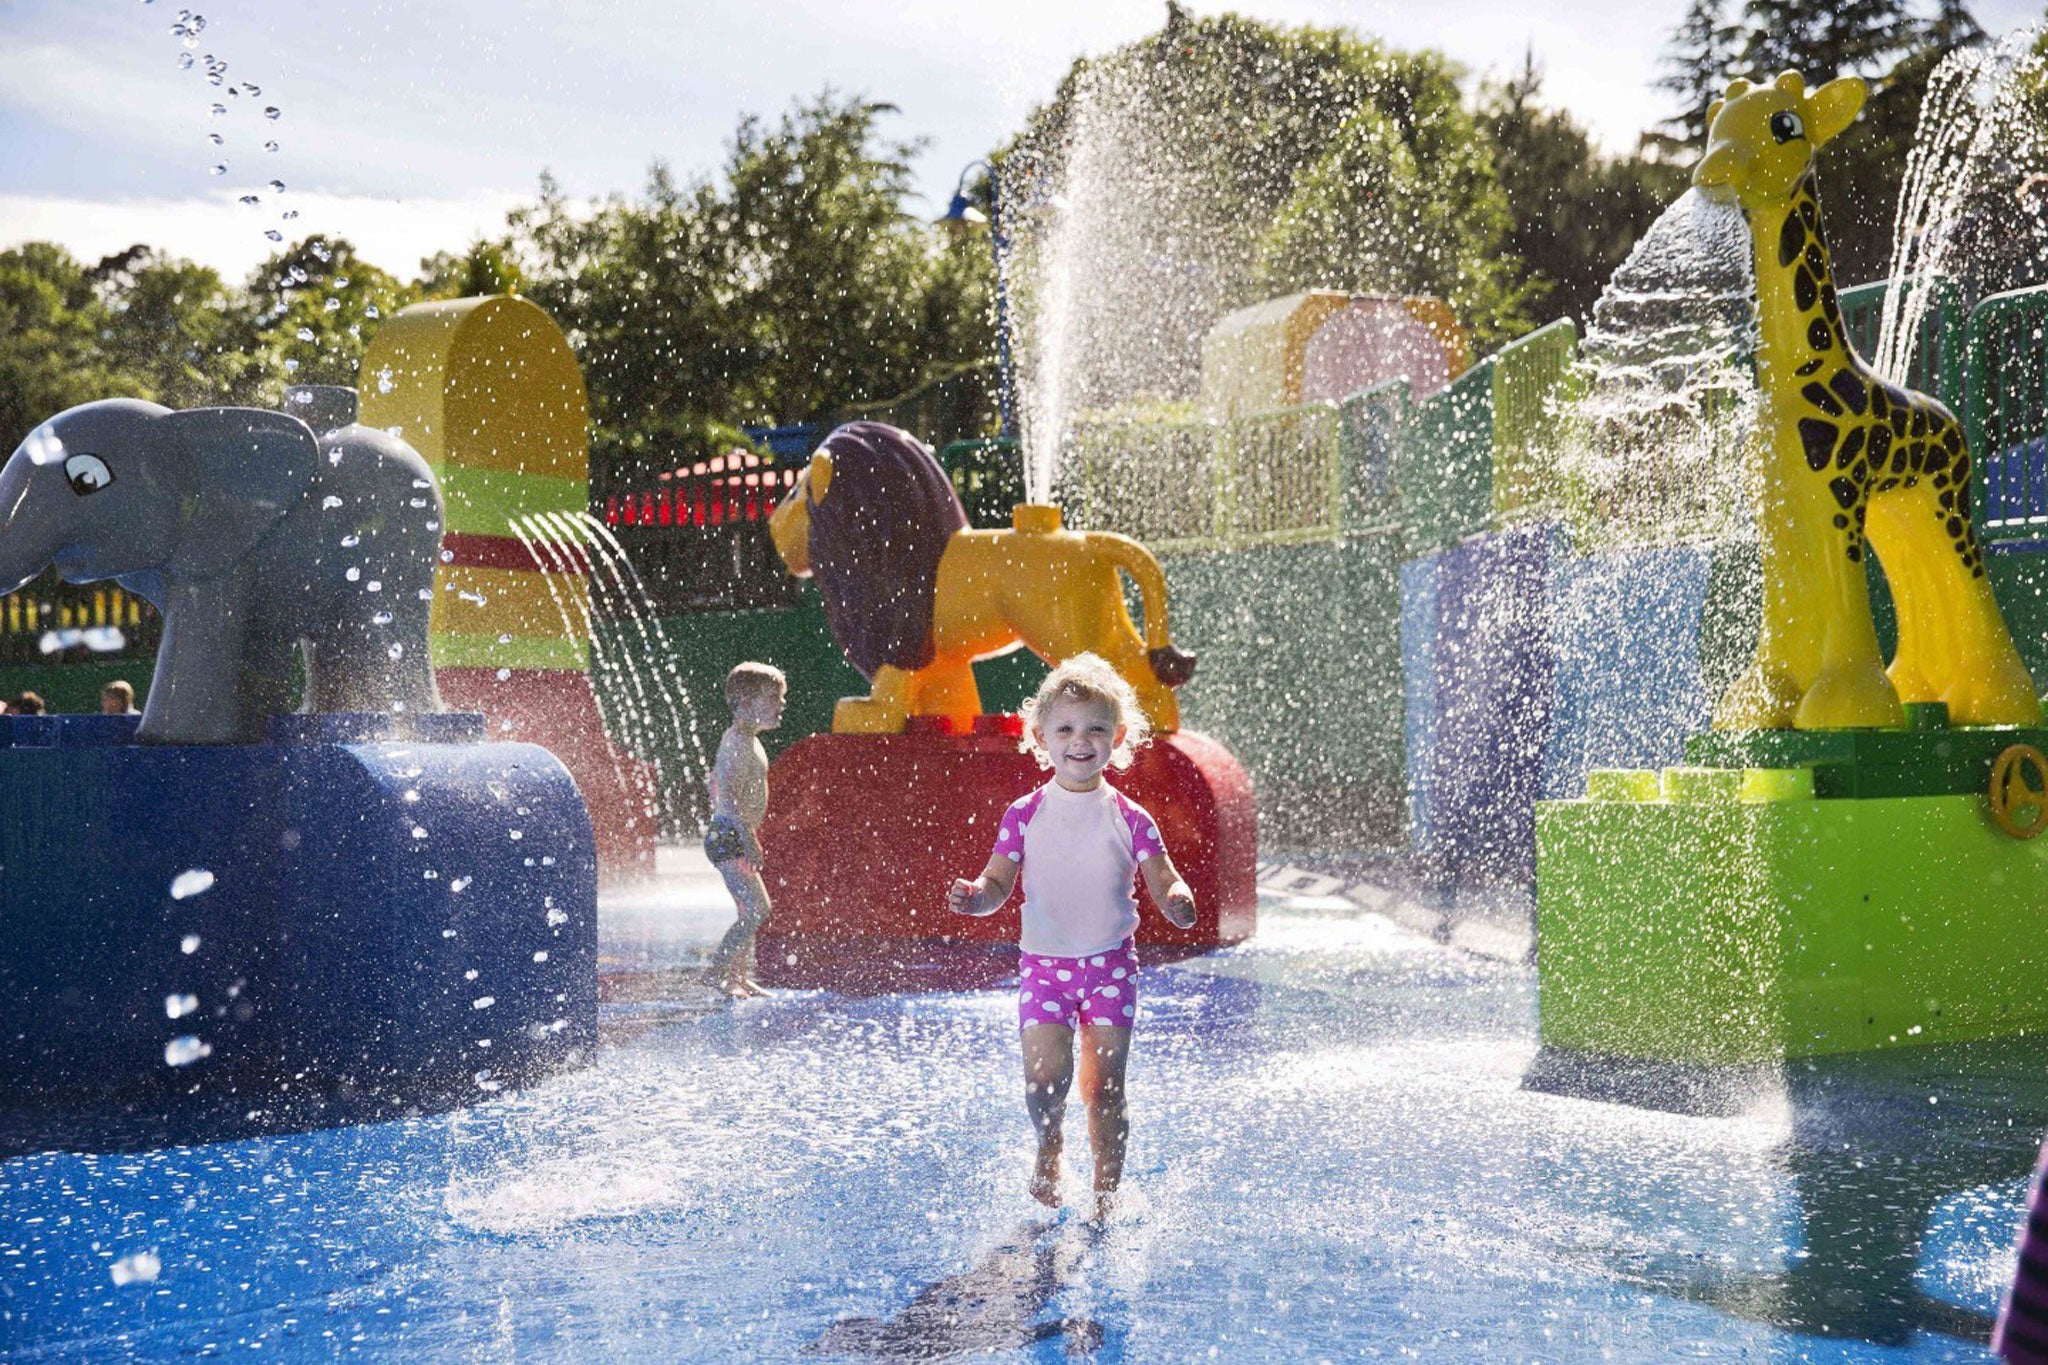 Splash out: at Legoland Windsor you can get a two-for-one deal